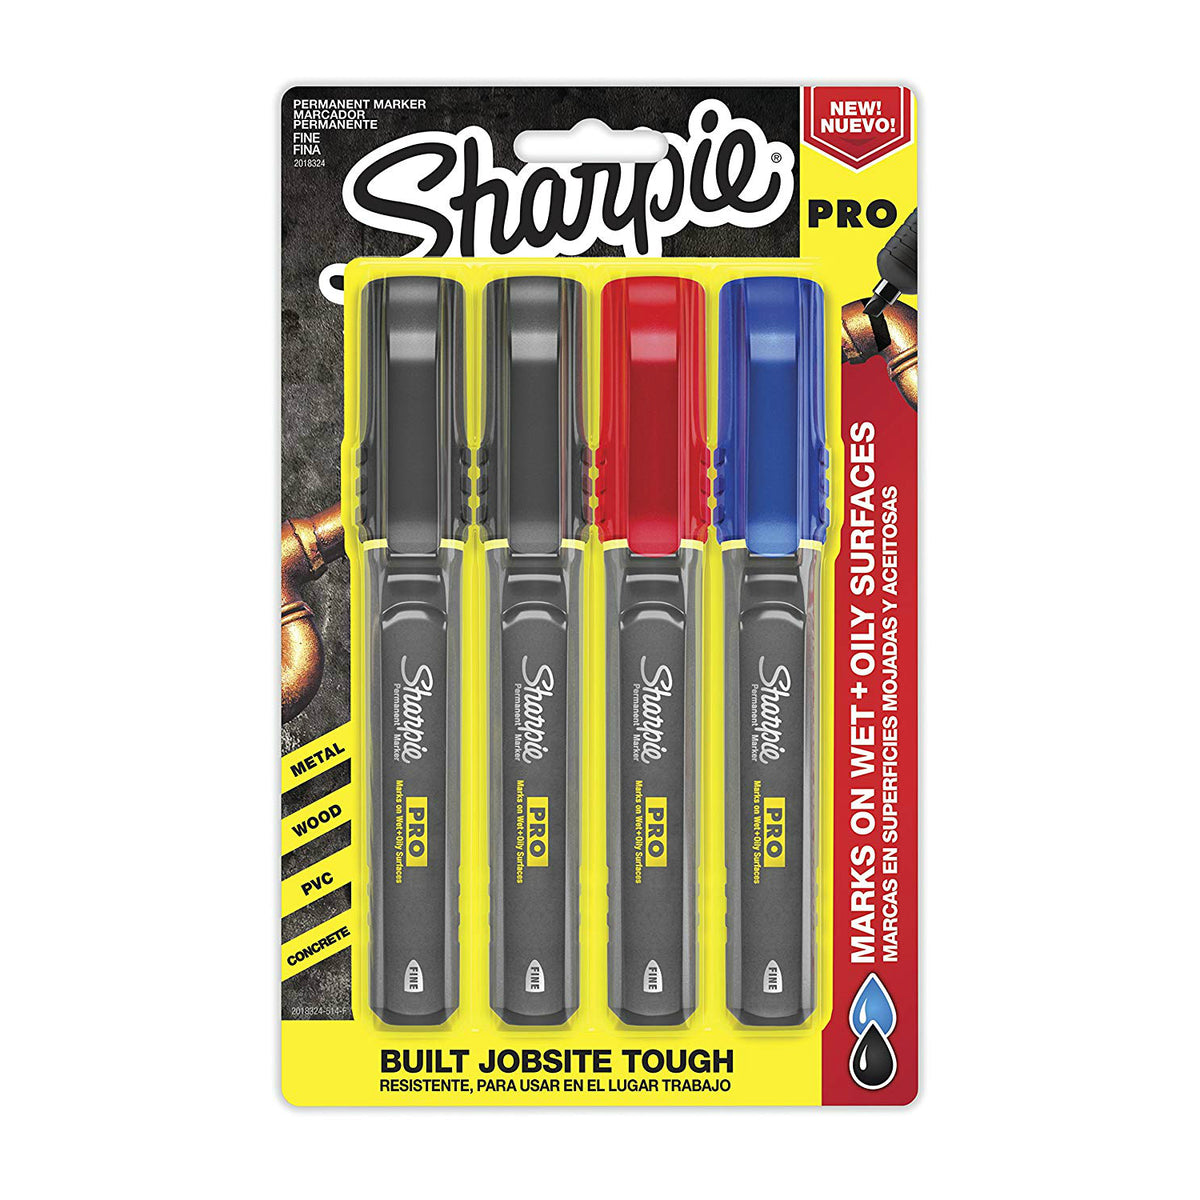 Sharpie 2018324 Pro Fine Tip Permanent Markers, Assorted Colors, 4-Count